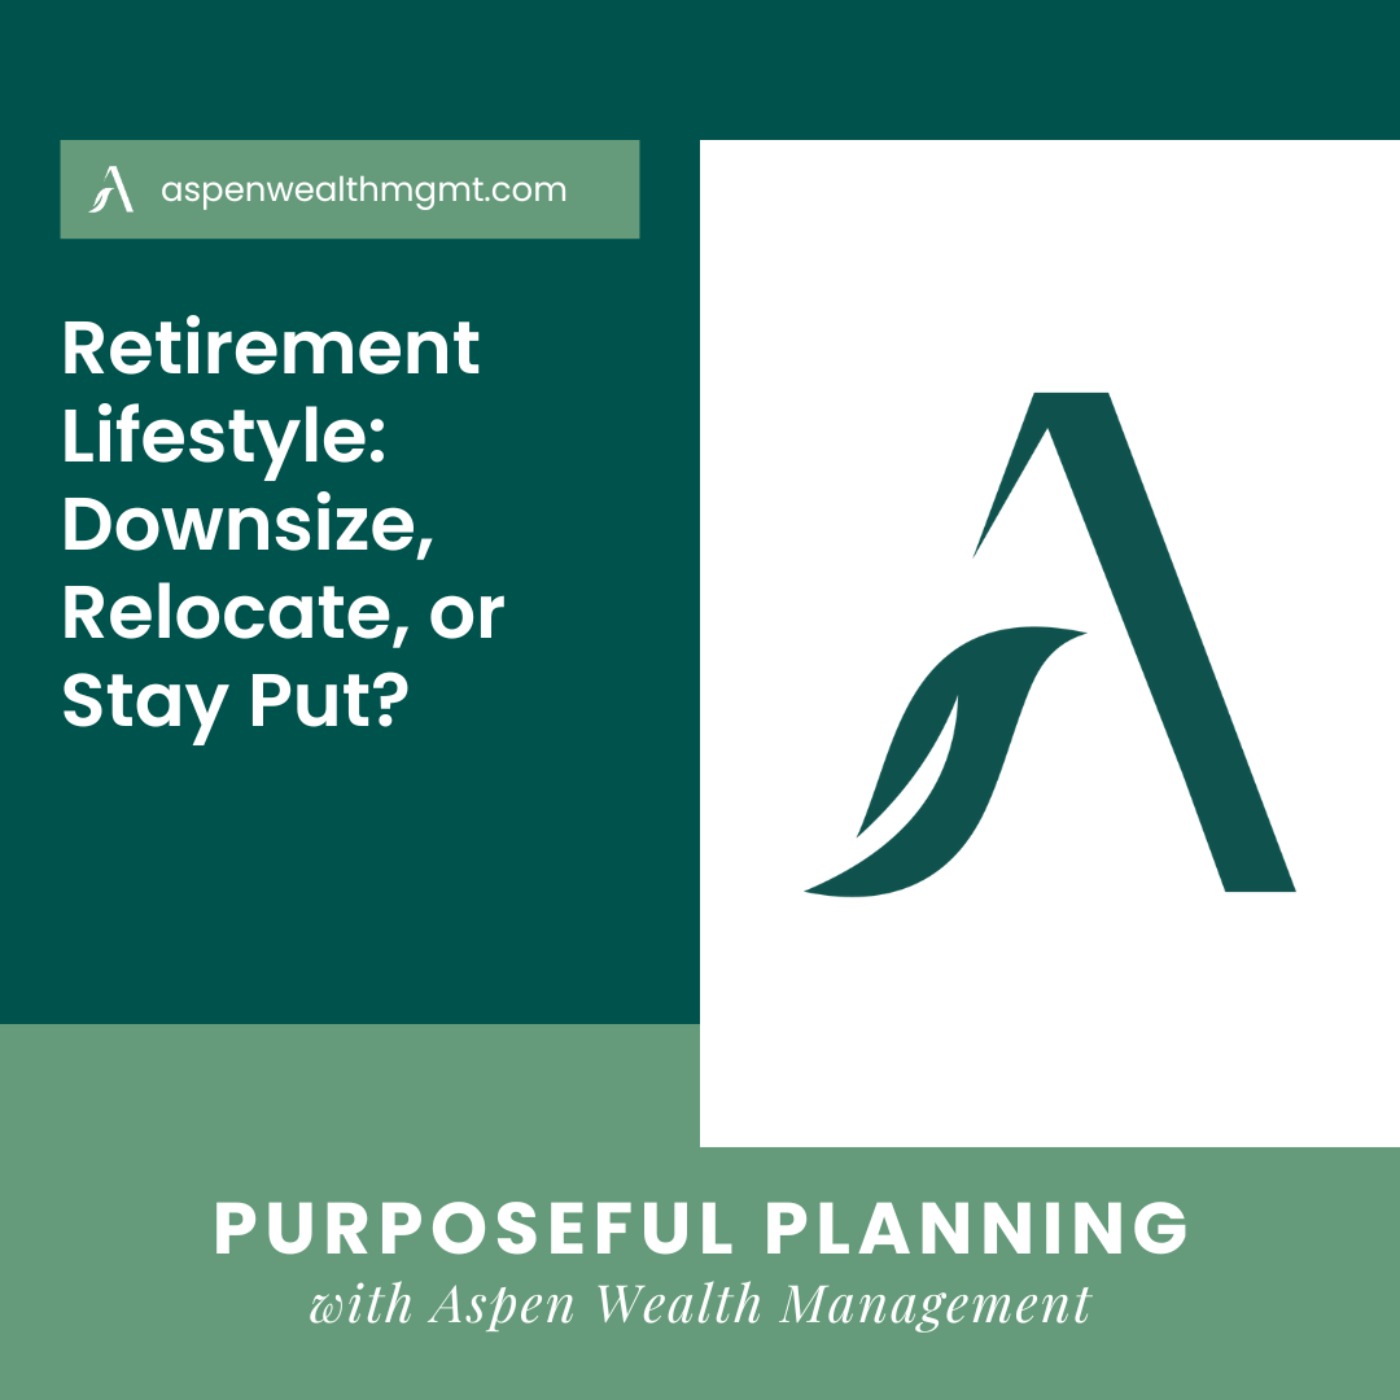 Retirement Lifestyle: Downsize, Relocate, or Stay Put?